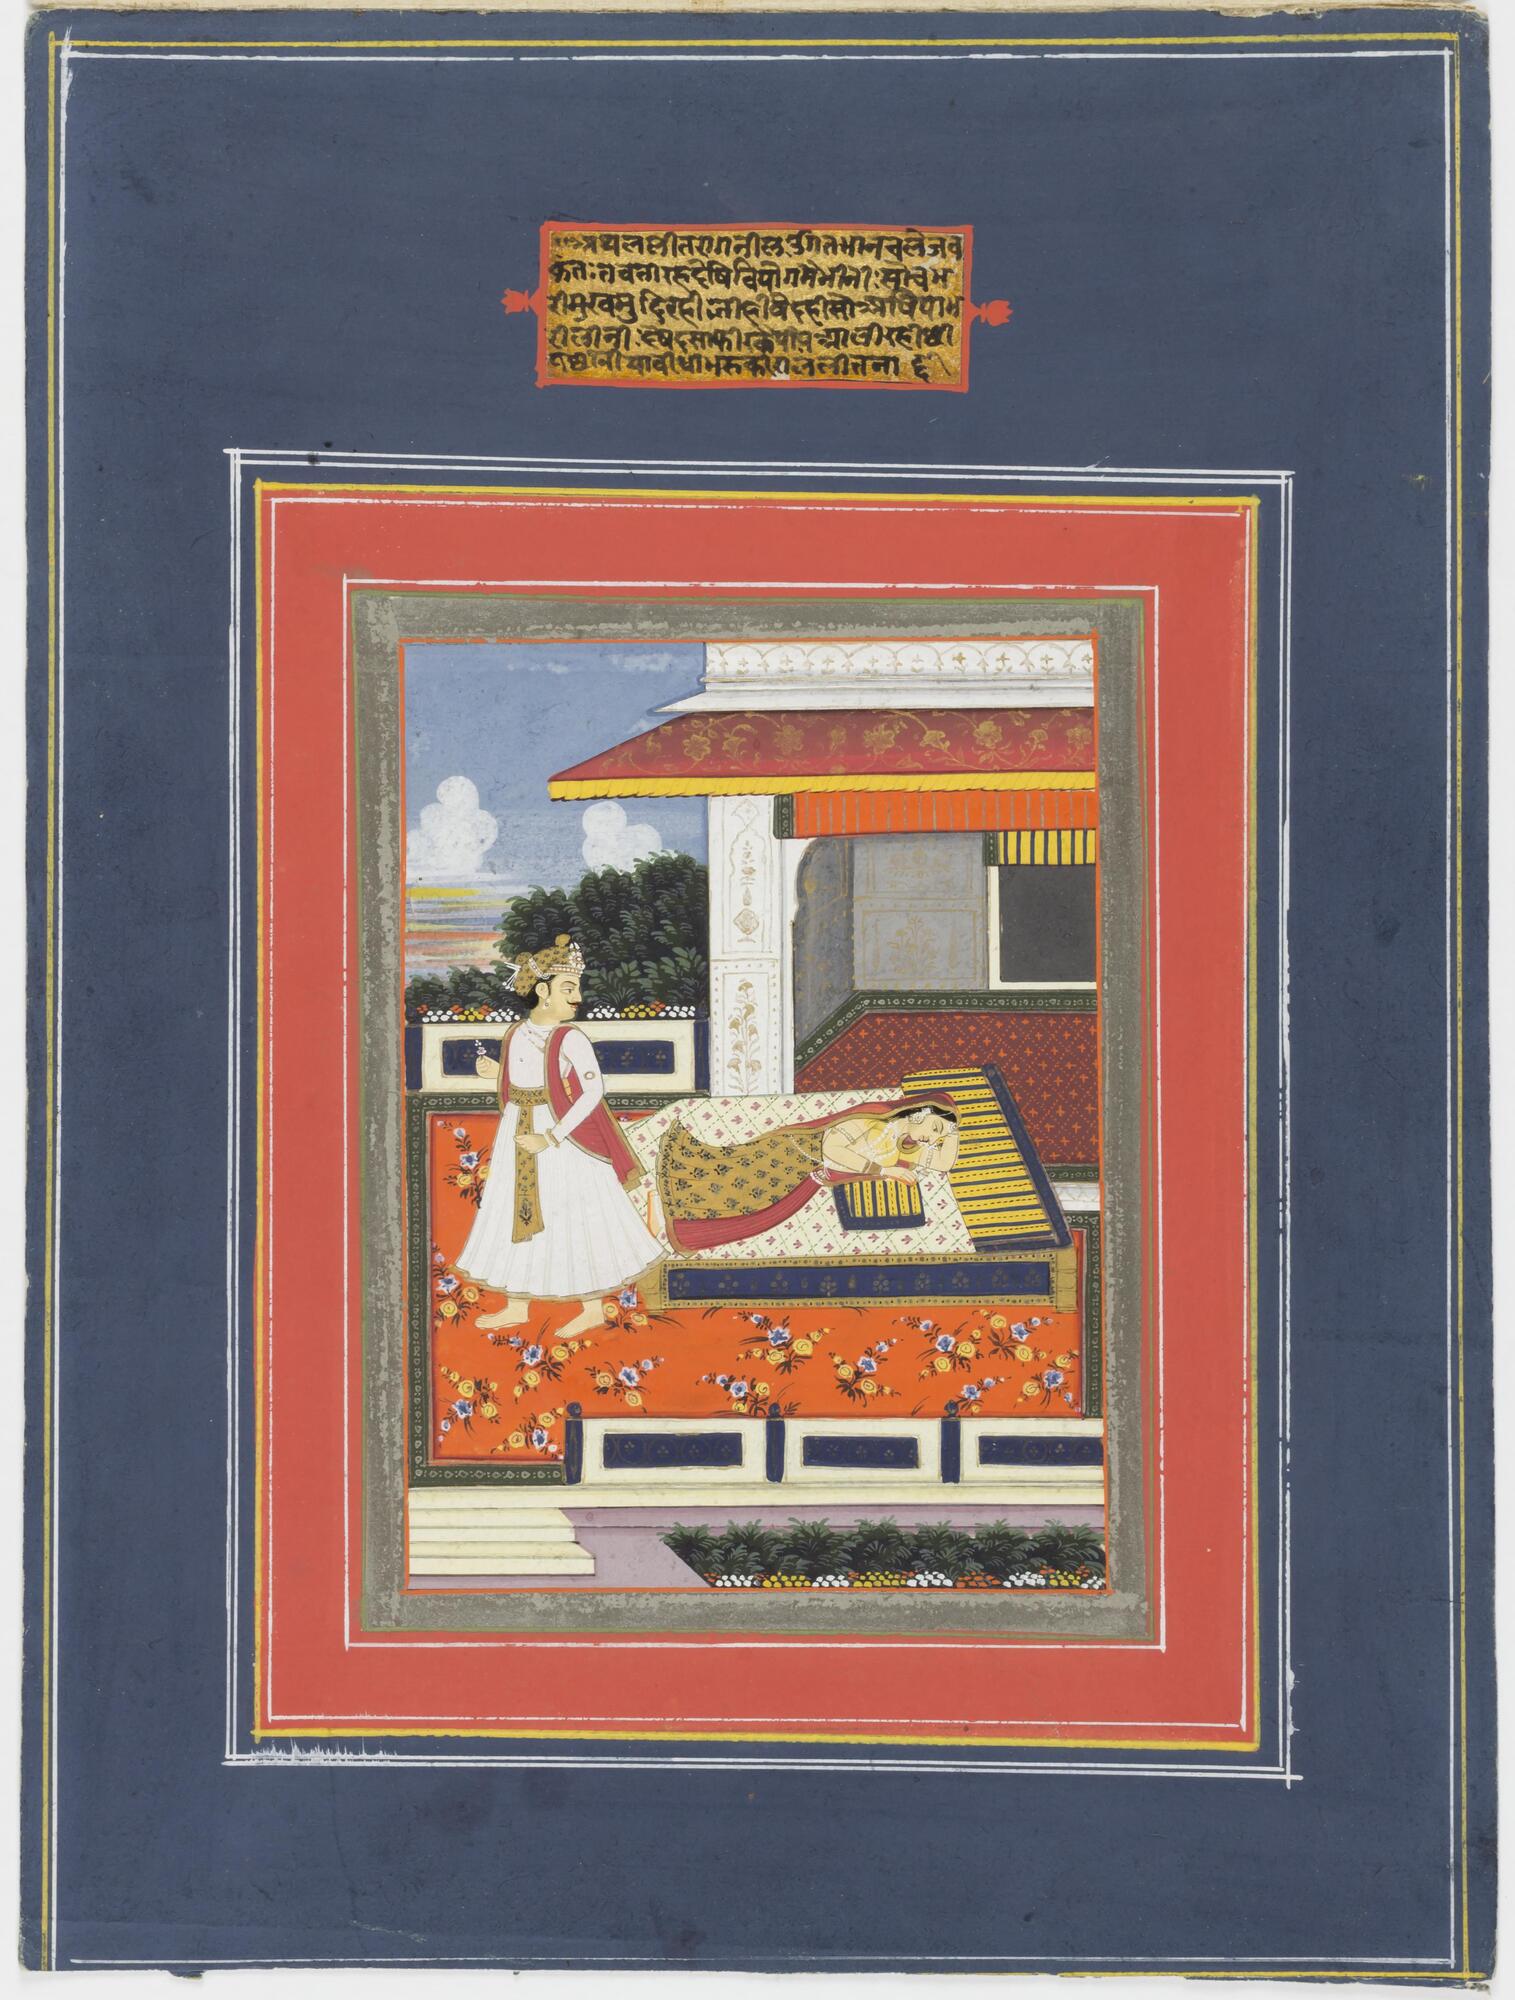 A standing male figure on the left looks back towards a female figure lying down on a bed. They are on an open terrace, and a pavilion/ building is shown in the background. It is day time and the sky is cloudy. A verse appears above the scene. The colors are bright.